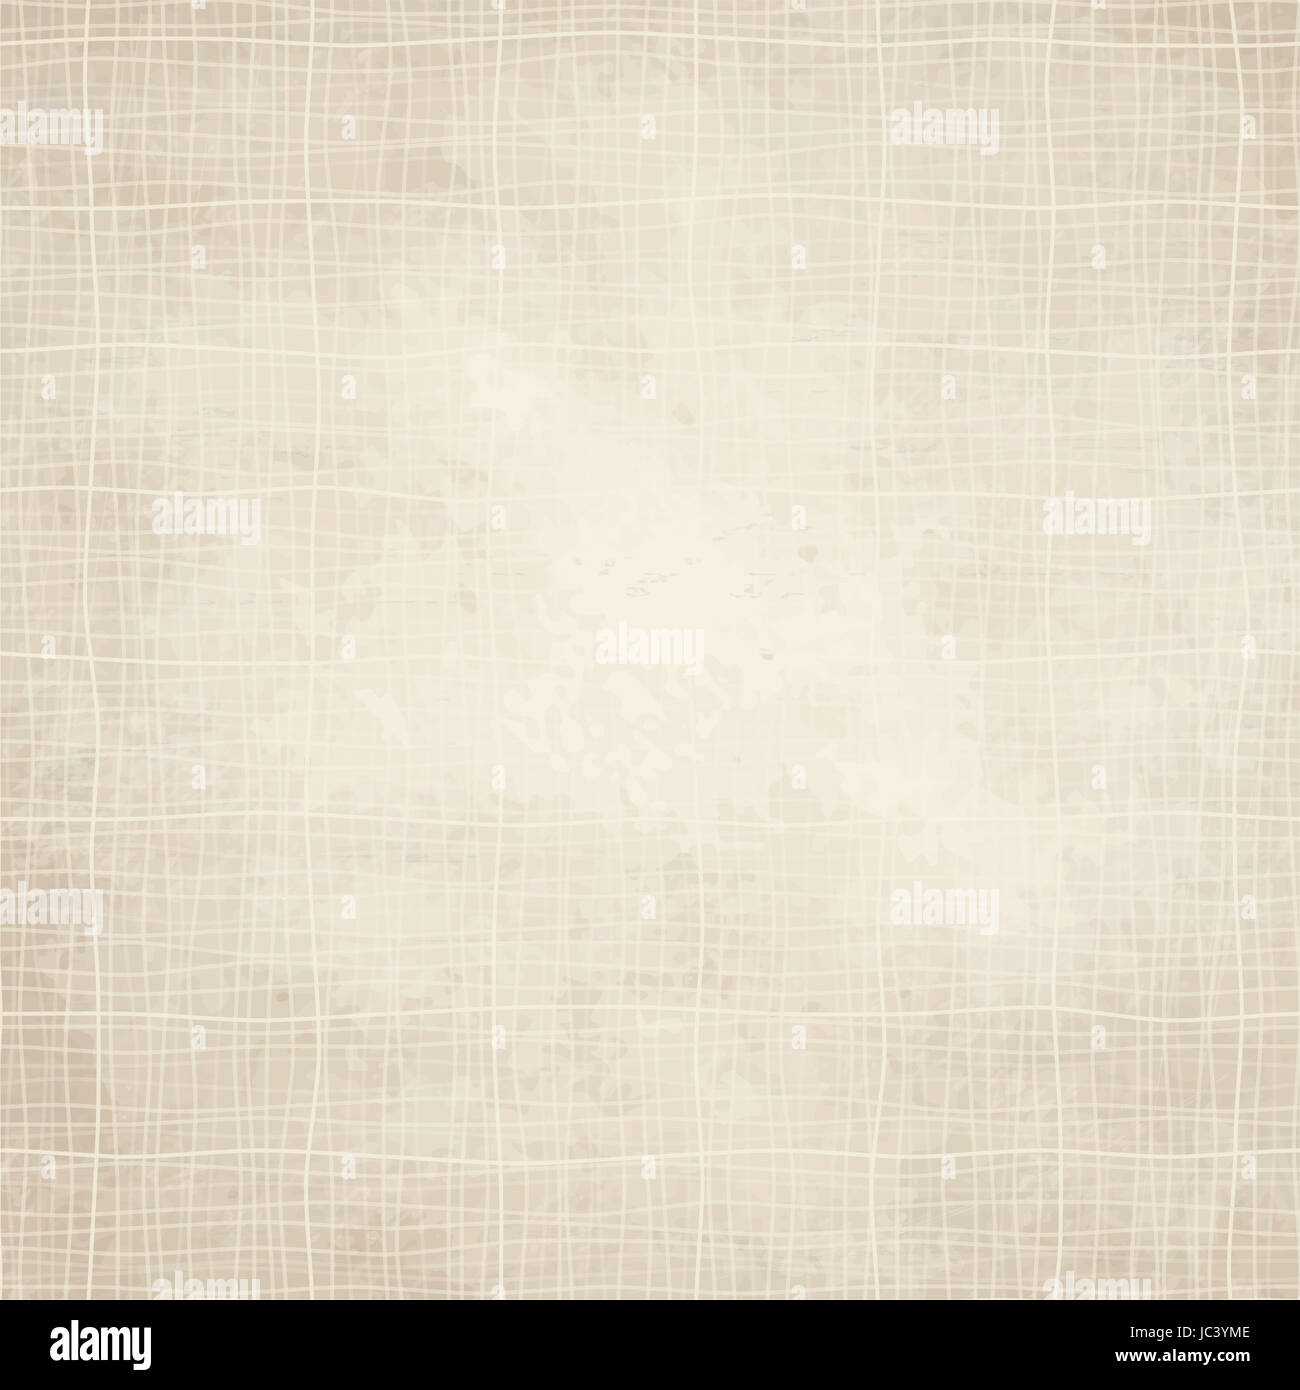 vector of old vintage paper background with Stock Photo